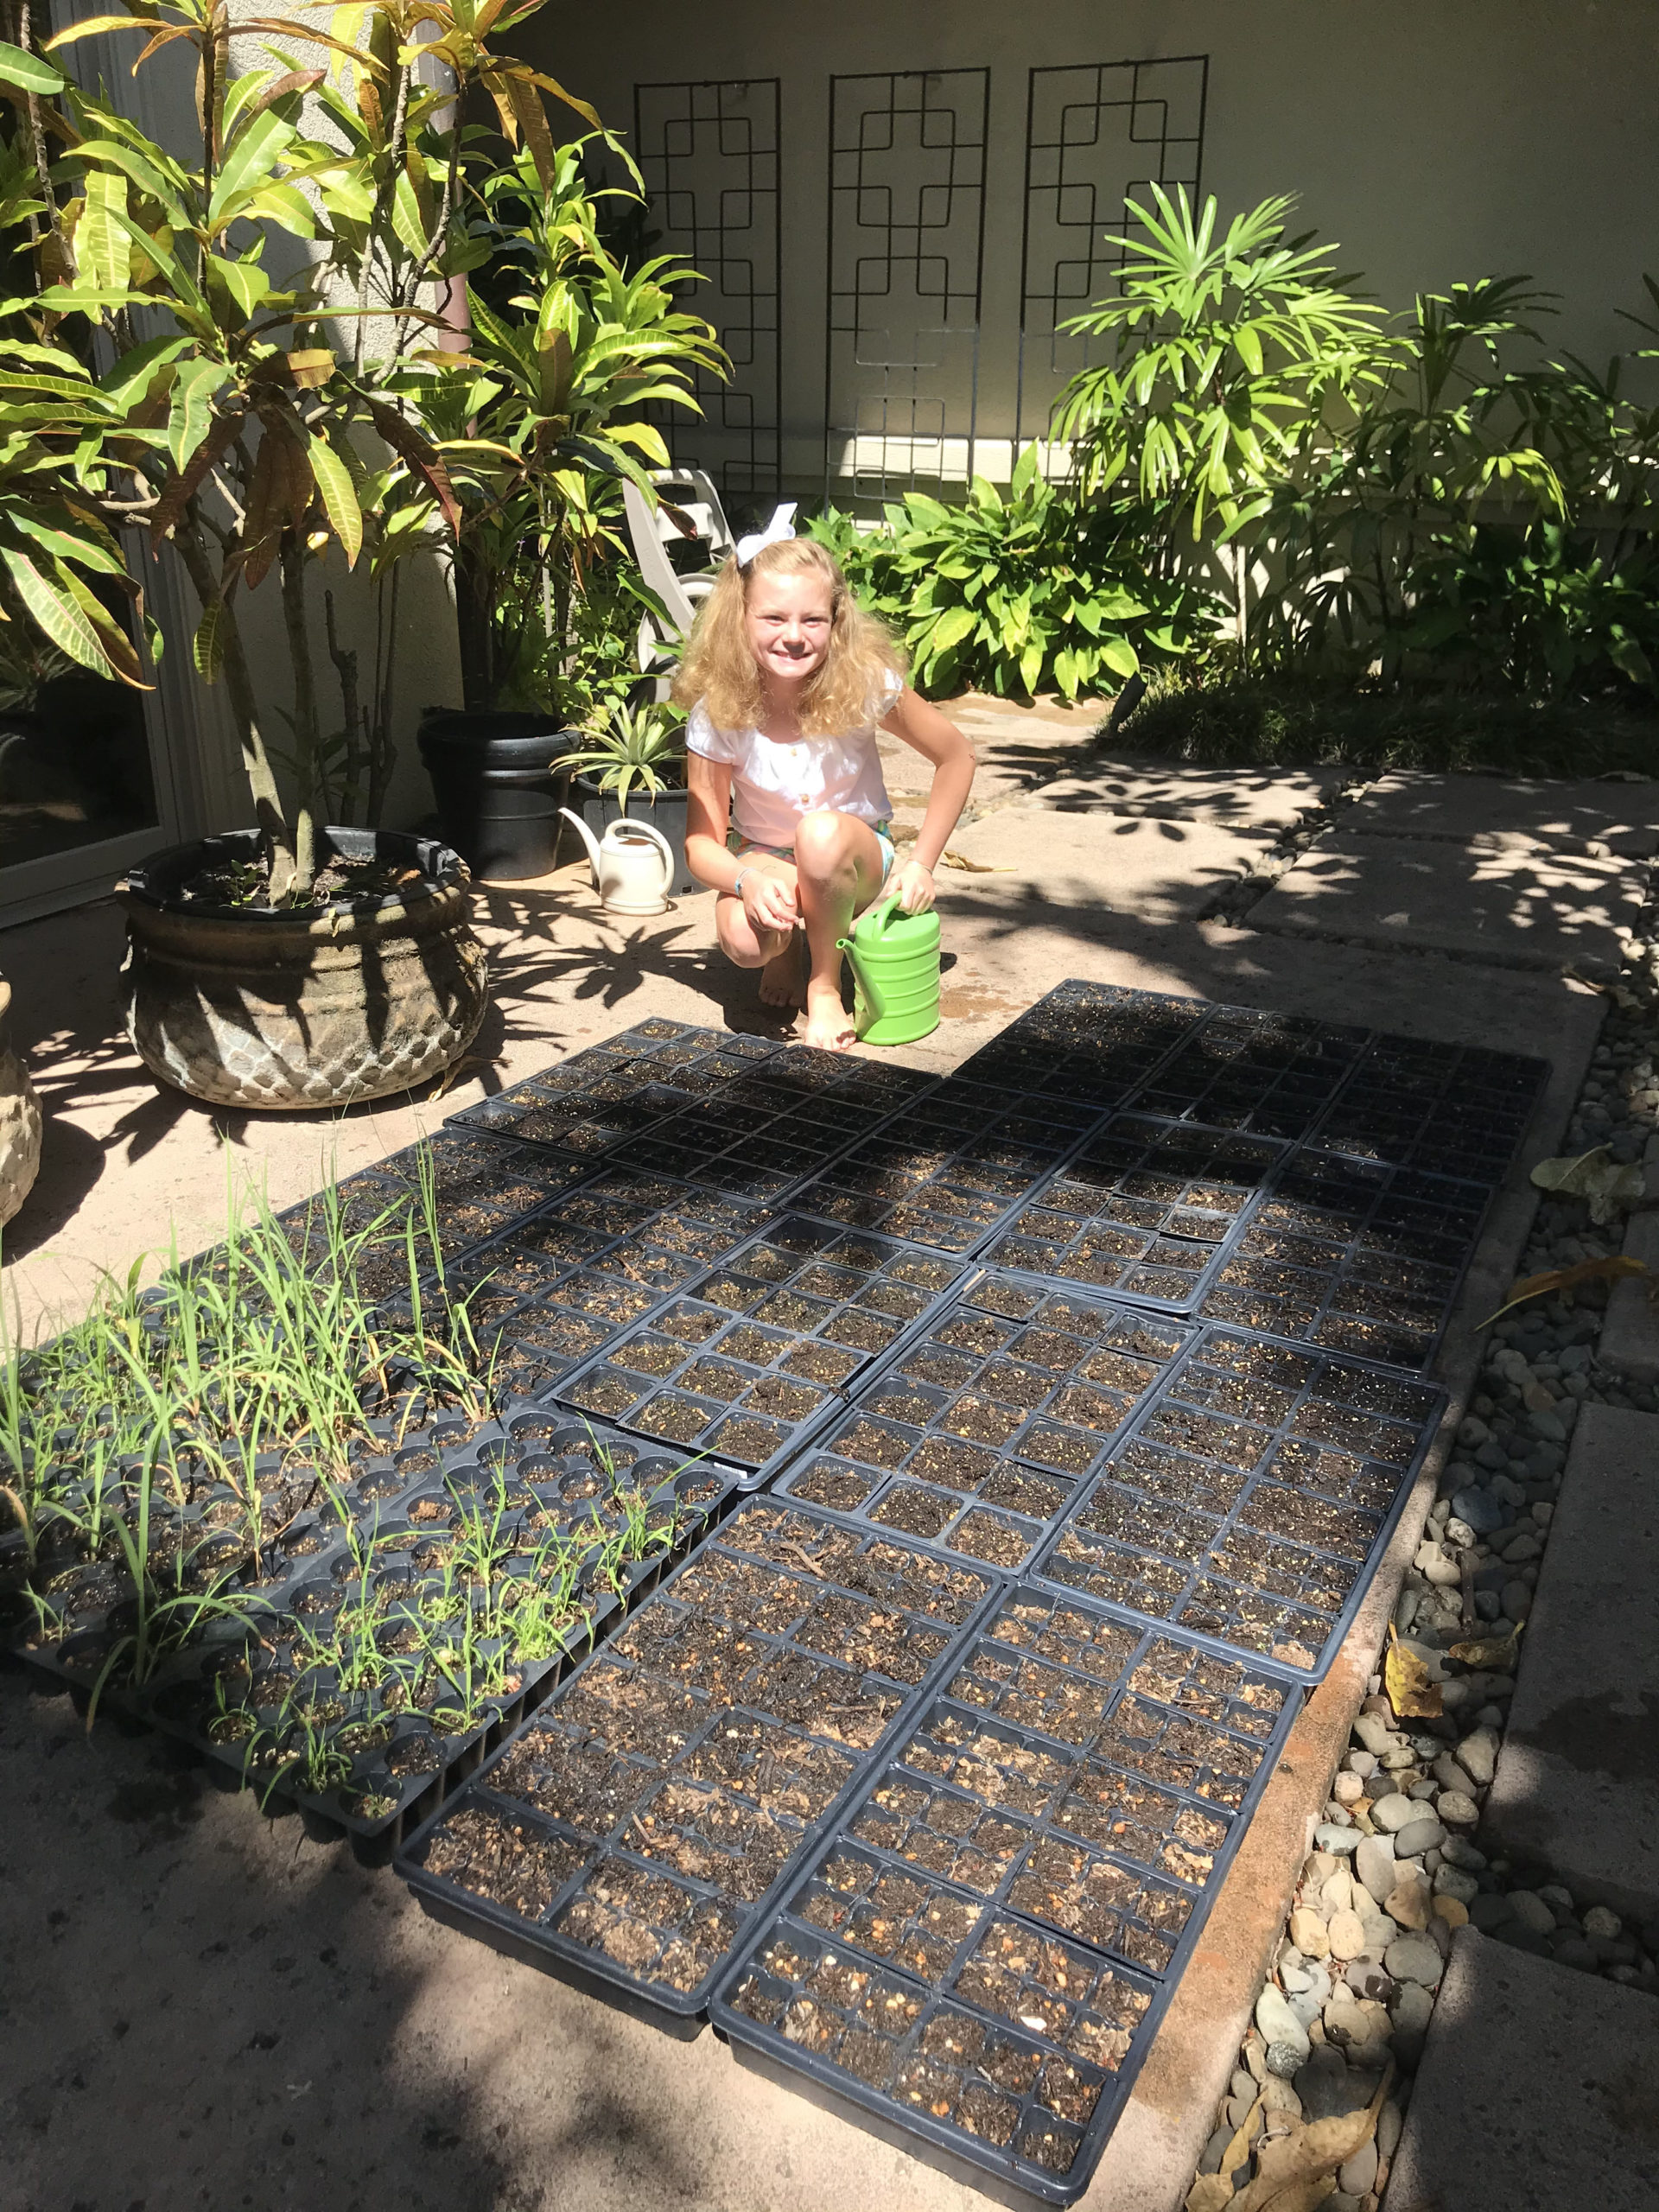 Abby Rogers with 900 native plant seedlings